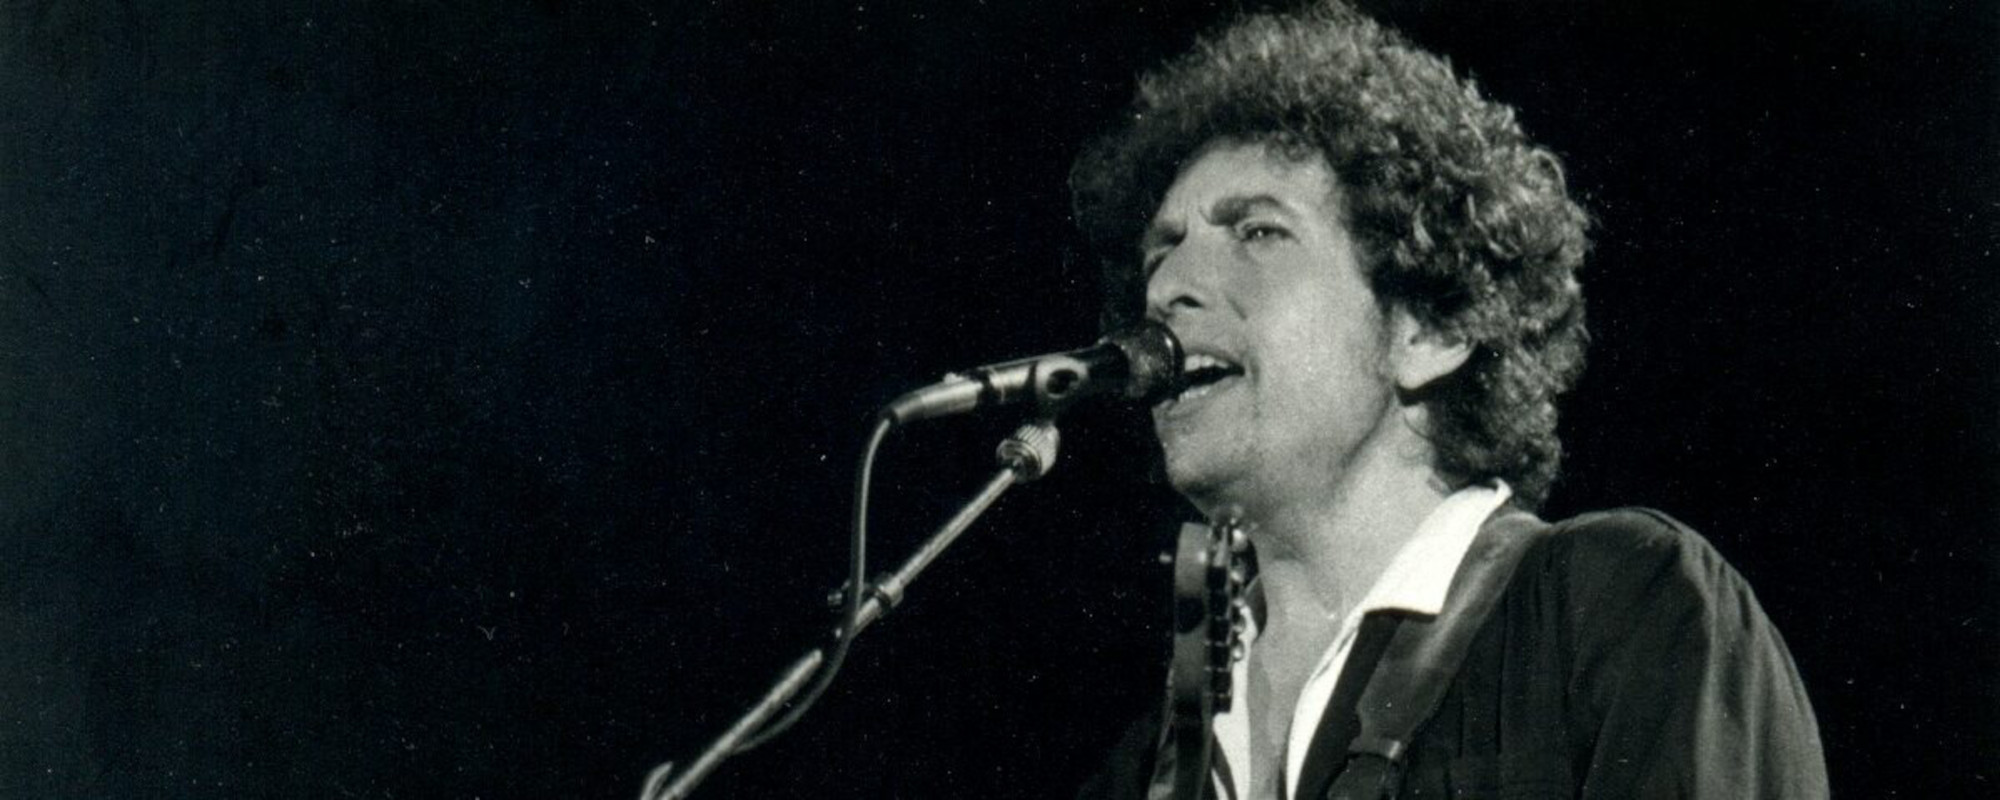 Bob Dylan Accused and Sued for Alleged Sexual Abuse of a Minor in 1965